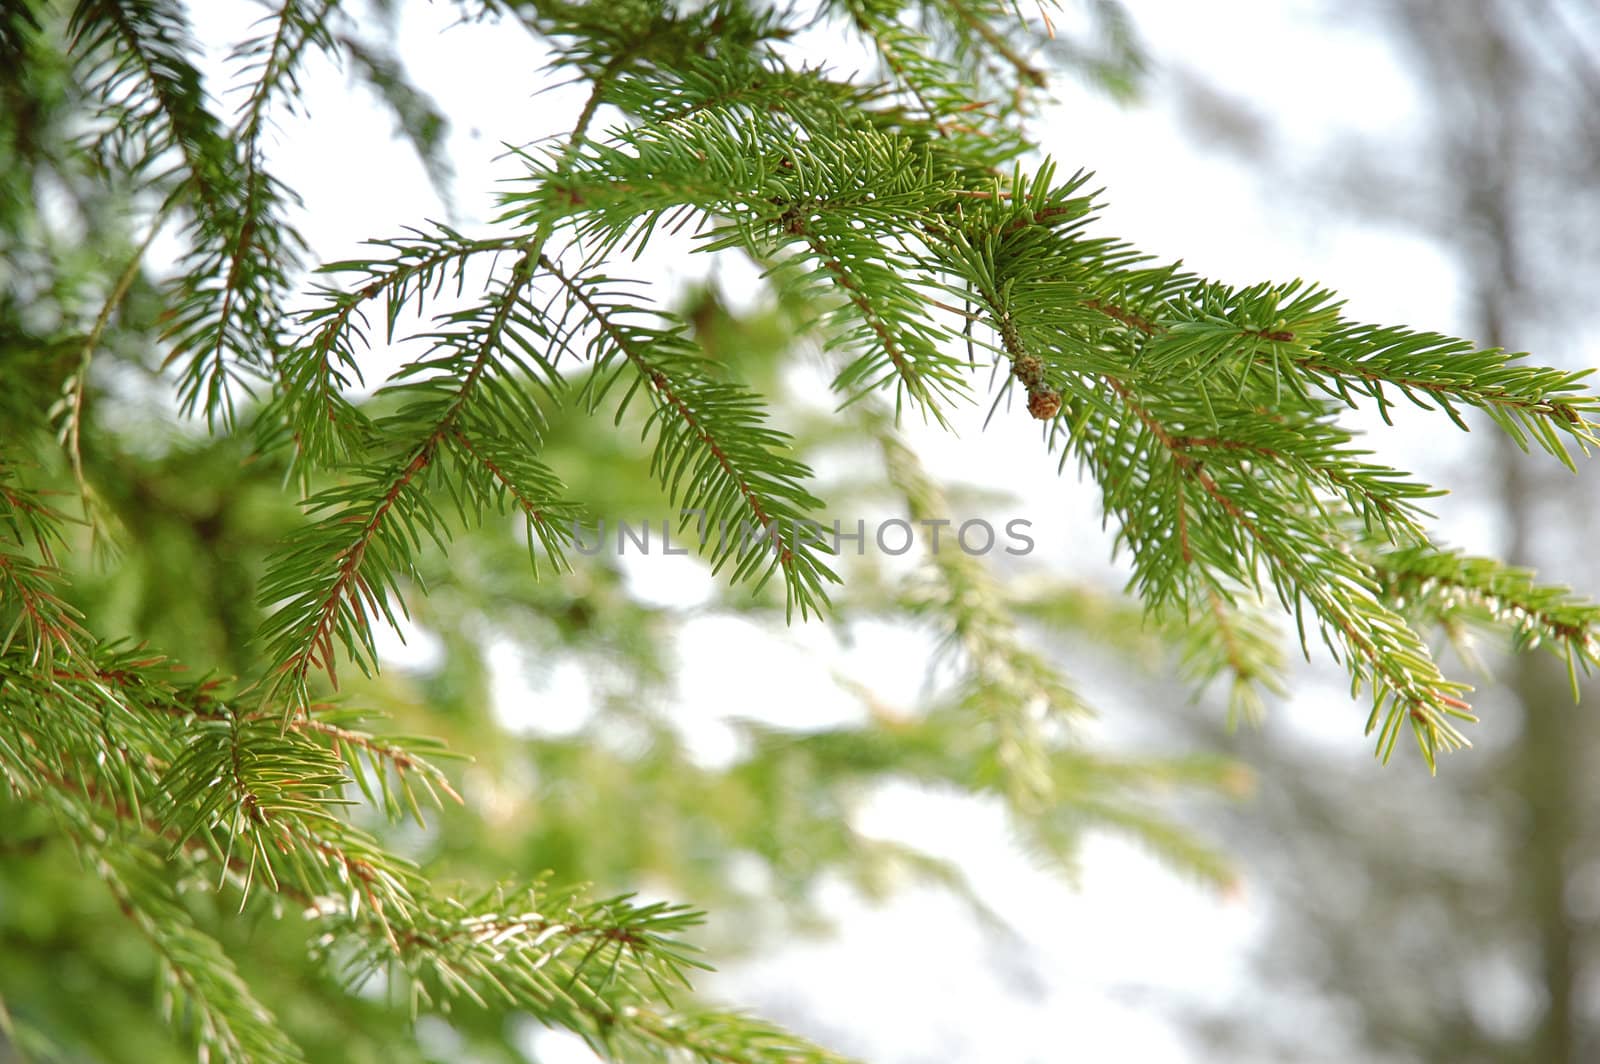 Conifer branchlets. Brightly green needles before spring - nature background.